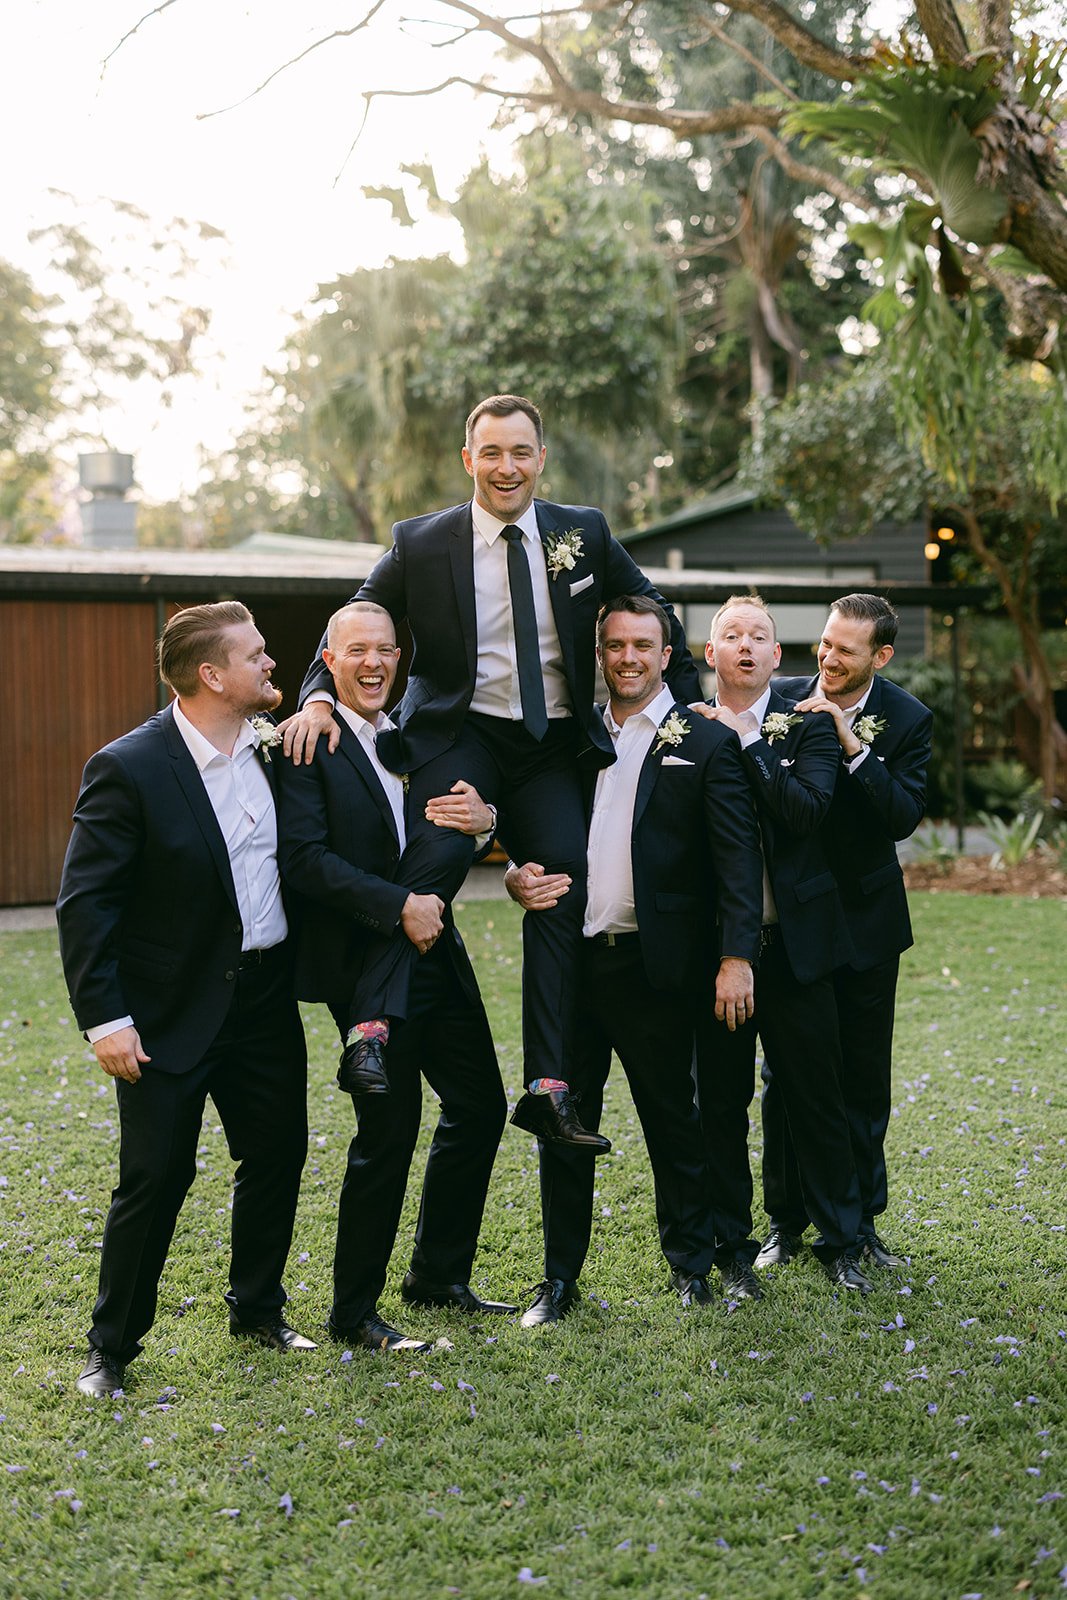 A groom sitting on top of his groomsman's shoulders. They boys are laughing and throwing him up in the air